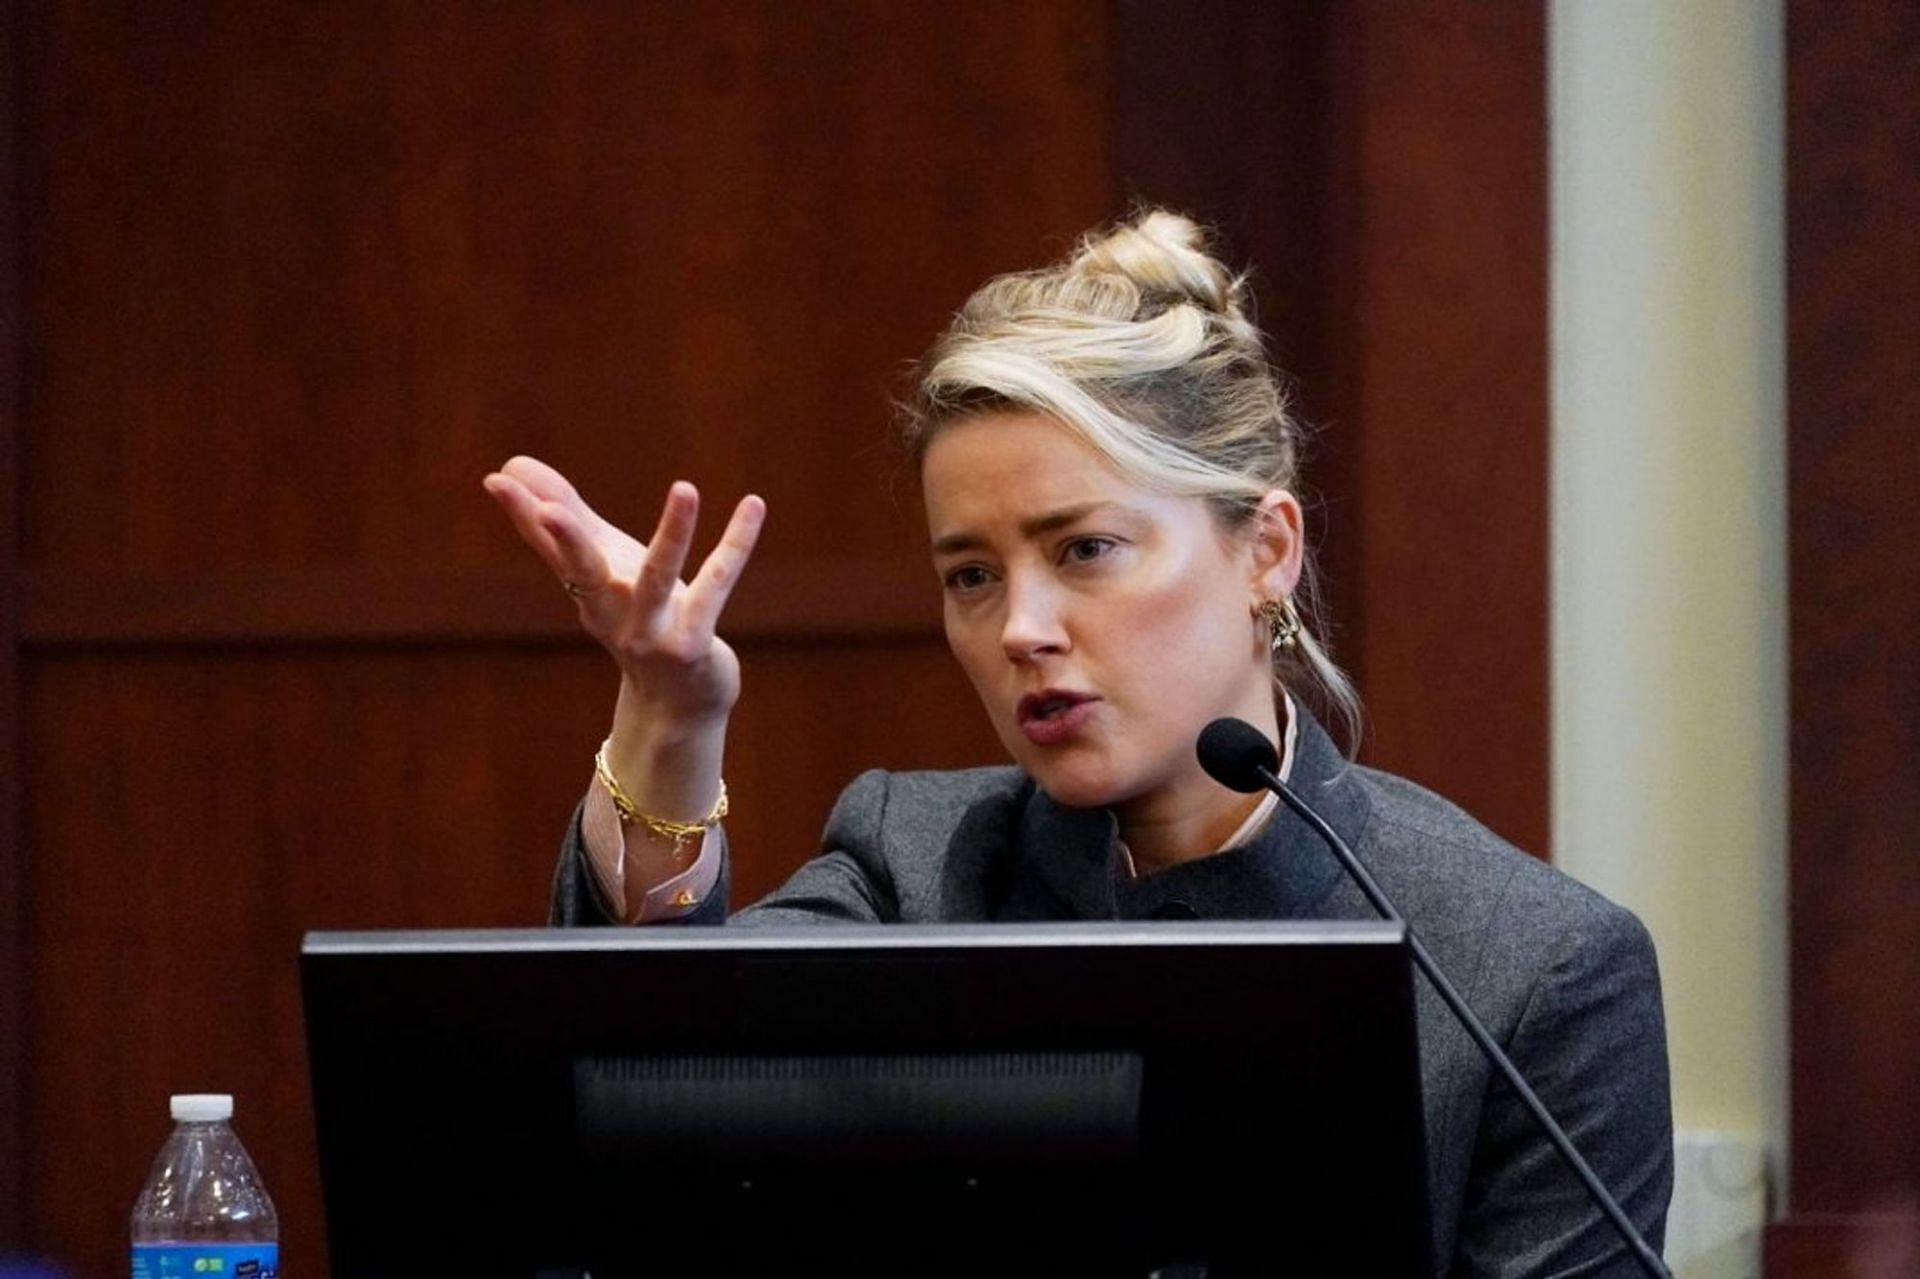 The juror admits to feeling &quot;uncomfortable&quot; with Amber Heard&#039;s constant eye contact (Image via Getty Images)